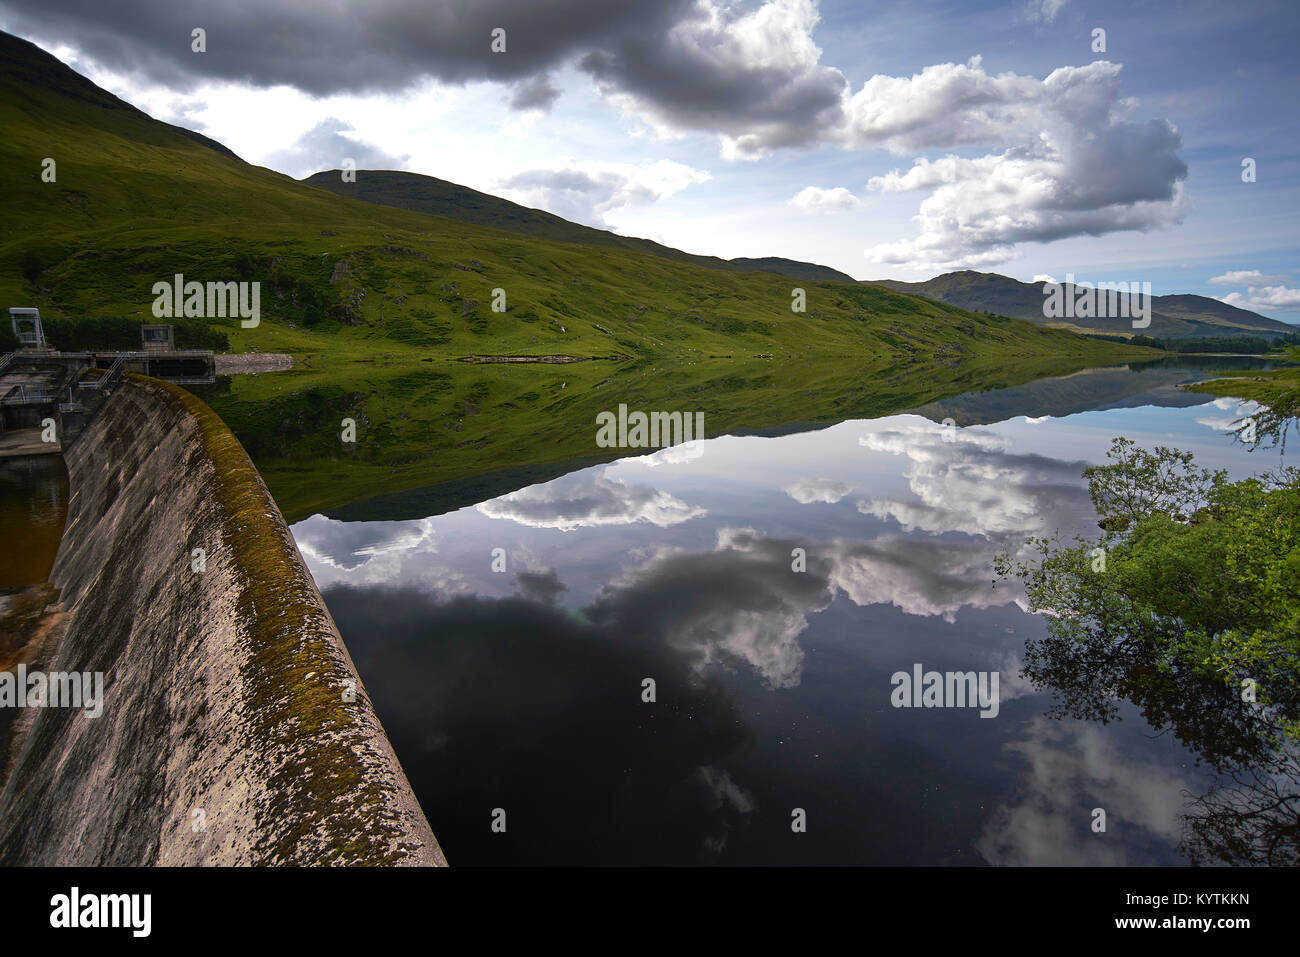 Hills reflected in the still waters of Stronuich Reservoir, Perthshire, Scotland. Stock Photo